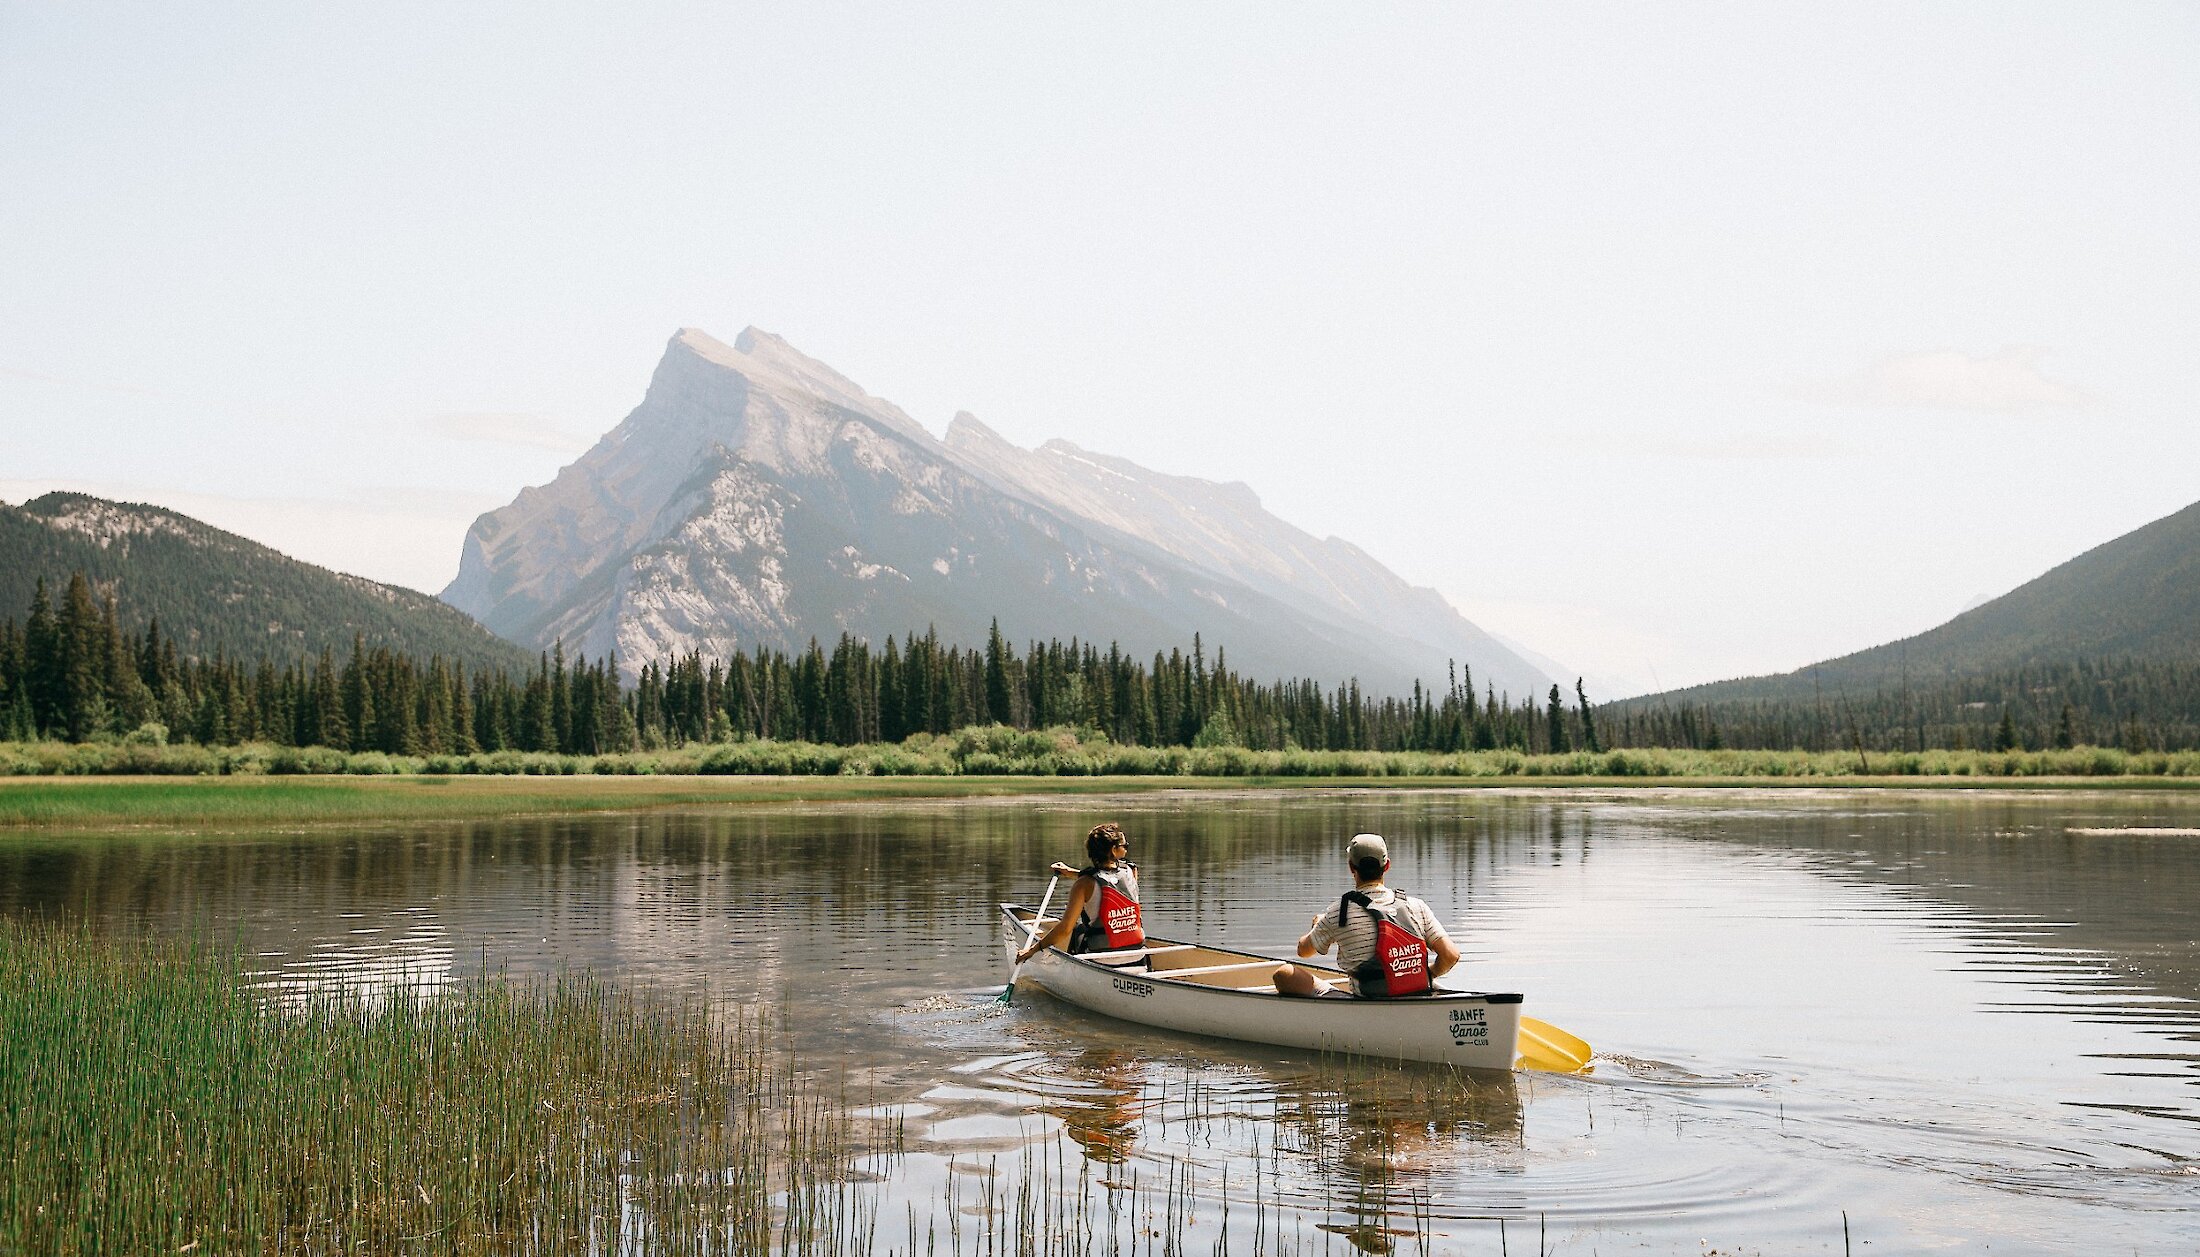 Canoeing in the Vermilian Lakes from the Banff Canoe Club